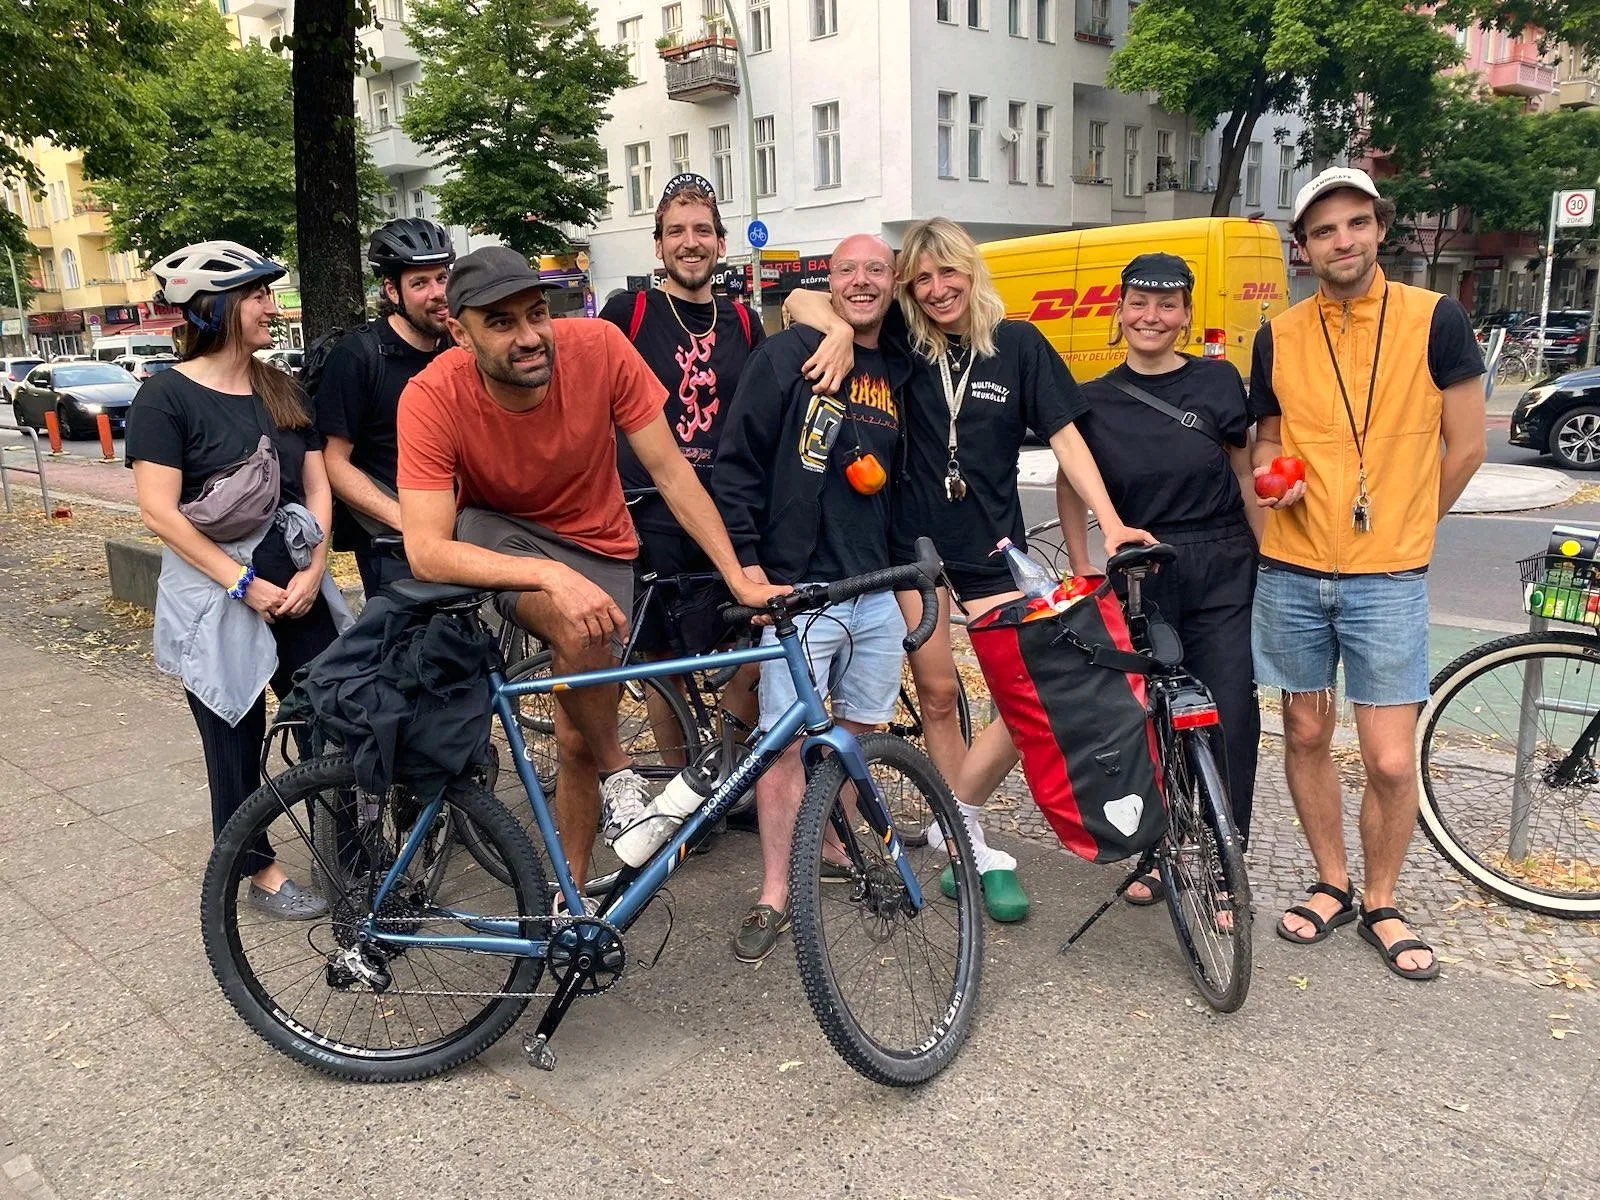 Group picture with bike